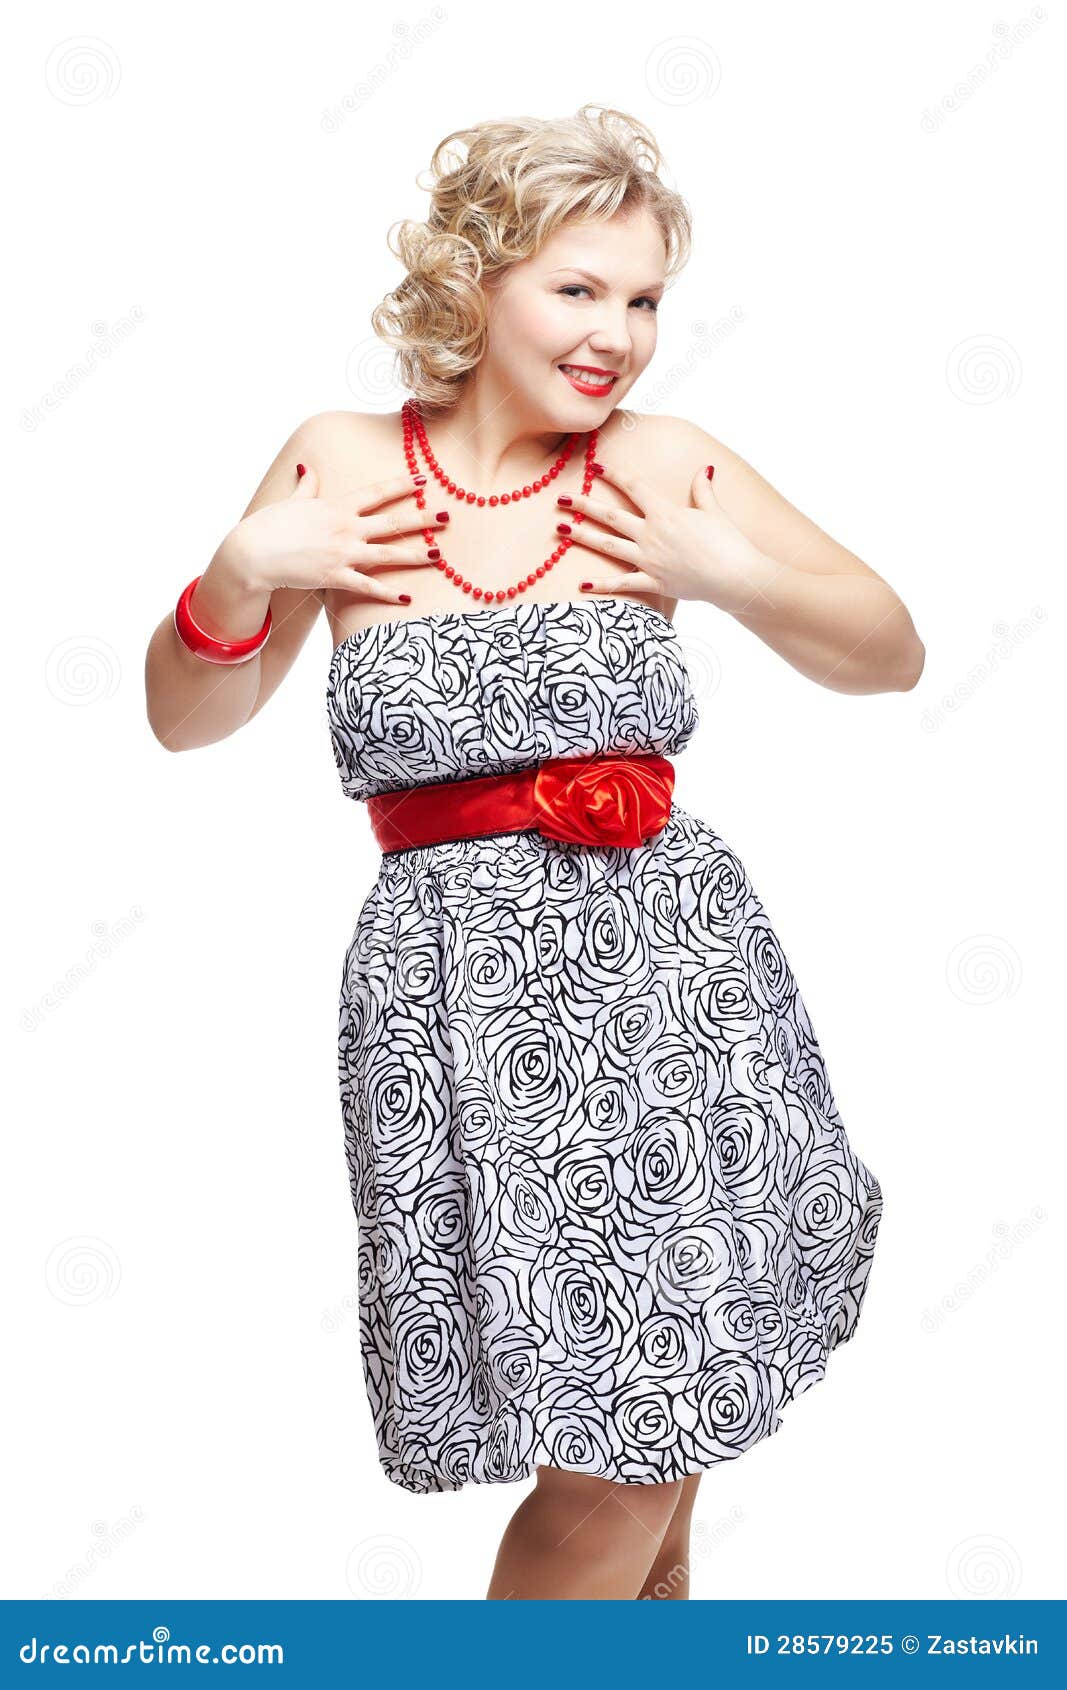 Blonde size plus model stock image. Image of curly, cute - 28579225